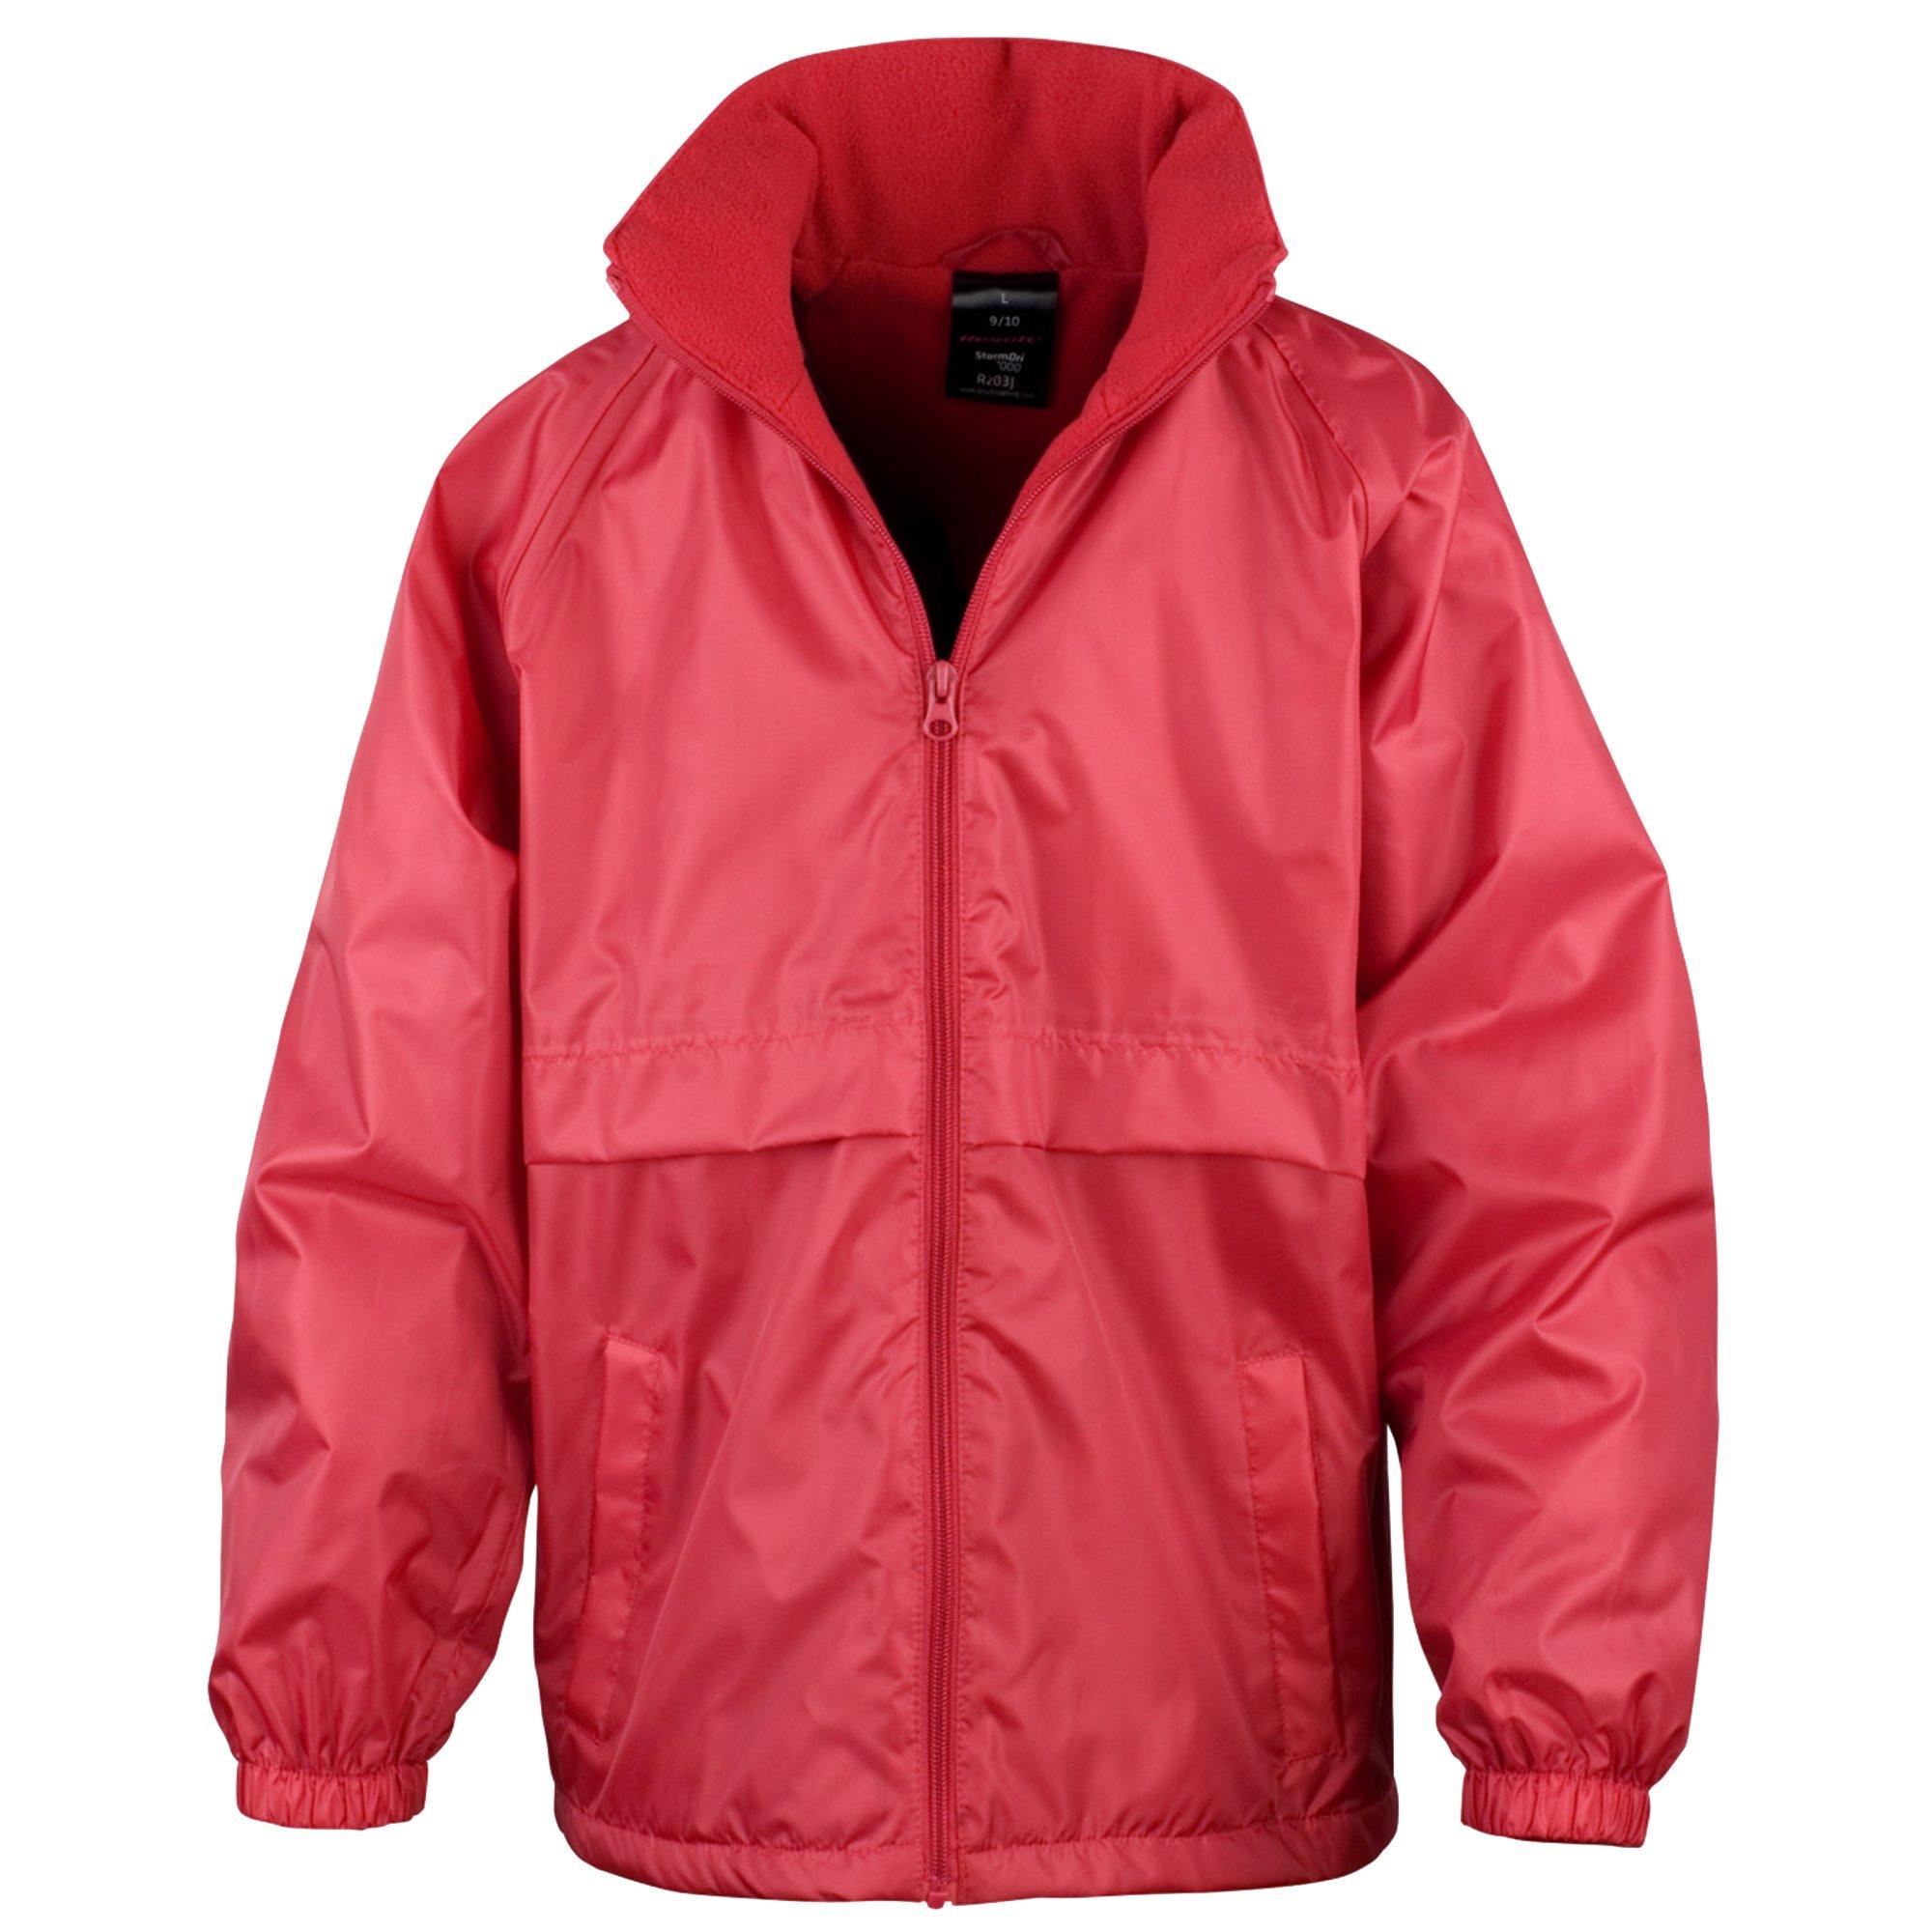 Image of Core Youth Dwl Jacke Unisex Rot Bunt 3-4A